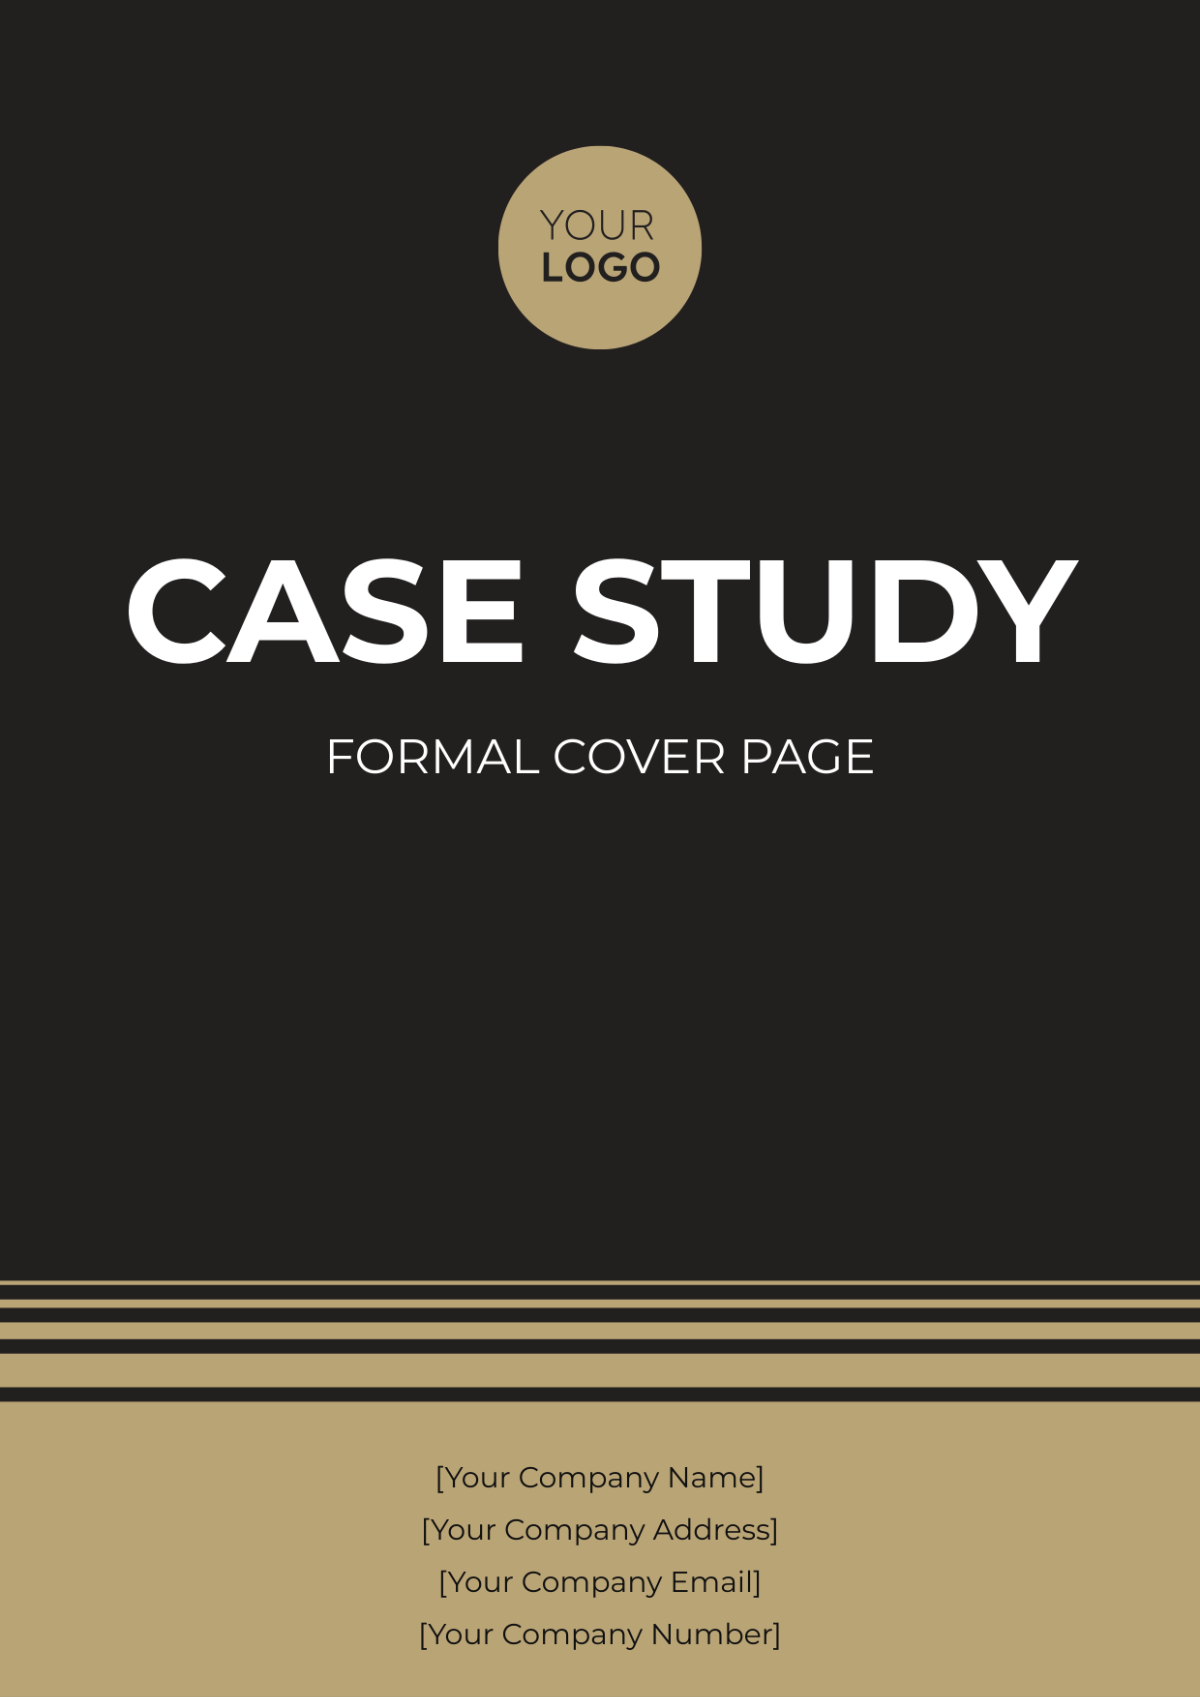 Case Study Formal Cover Page